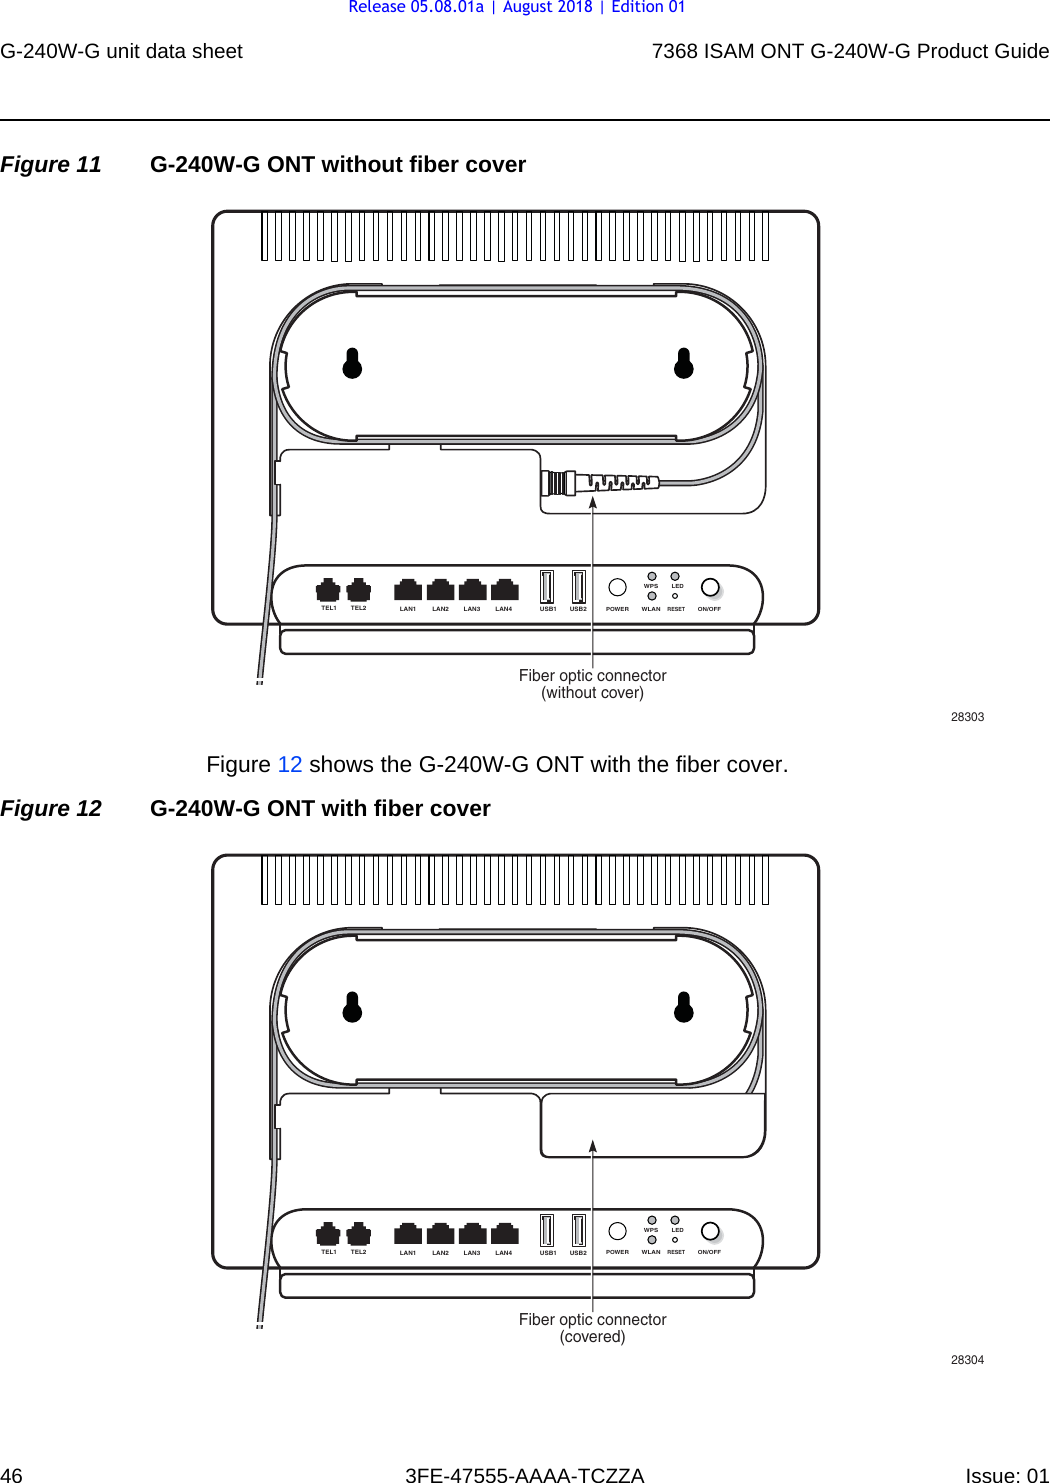 G-240W-G unit data sheet467368 ISAM ONT G-240W-G Product Guide3FE-47555-AAAA-TCZZA Issue: 01 Figure 11 G-240W-G ONT without fiber coverFigure 12 shows the G-240W-G ONT with the fiber cover.Figure 12 G-240W-G ONT with fiber cover28303USB2USB1LAN4LAN3LAN2LAN1TEL1 TEL2ON/OFFPOWERLEDRESETWPSWLANFiber optic connector(without cover)28304USB2USB1LAN4LAN3LAN2LAN1TEL1 TEL2ON/OFFPOWERLEDRESETWPSWLANFiber optic connector(covered)Release 05.08.01a | August 2018 | Edition 01